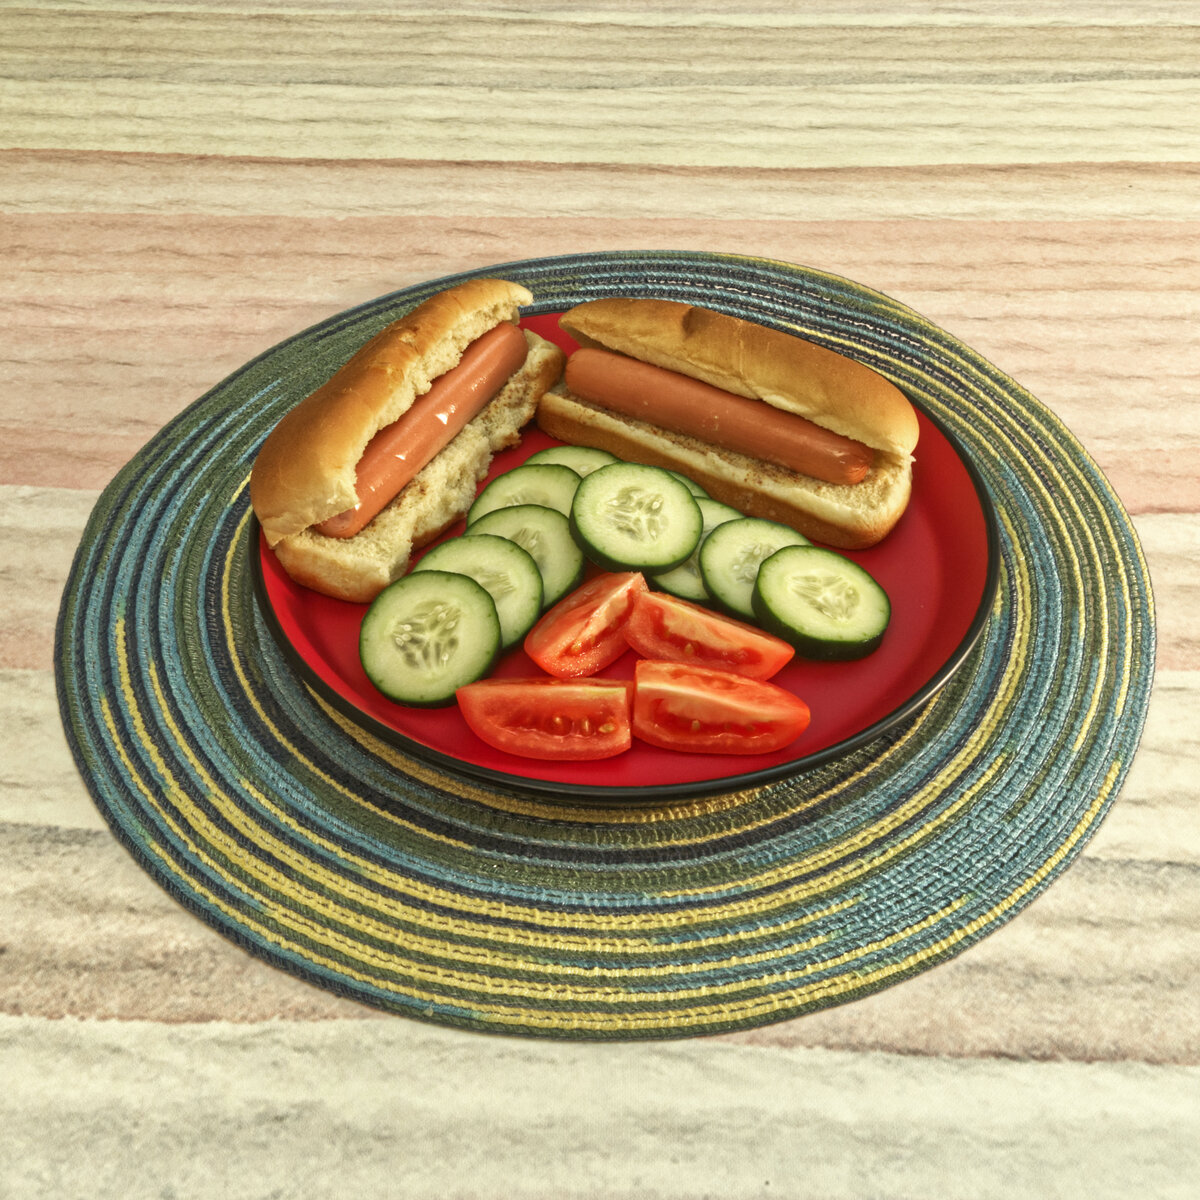 Hot Dogs, Cucumber and Tomato